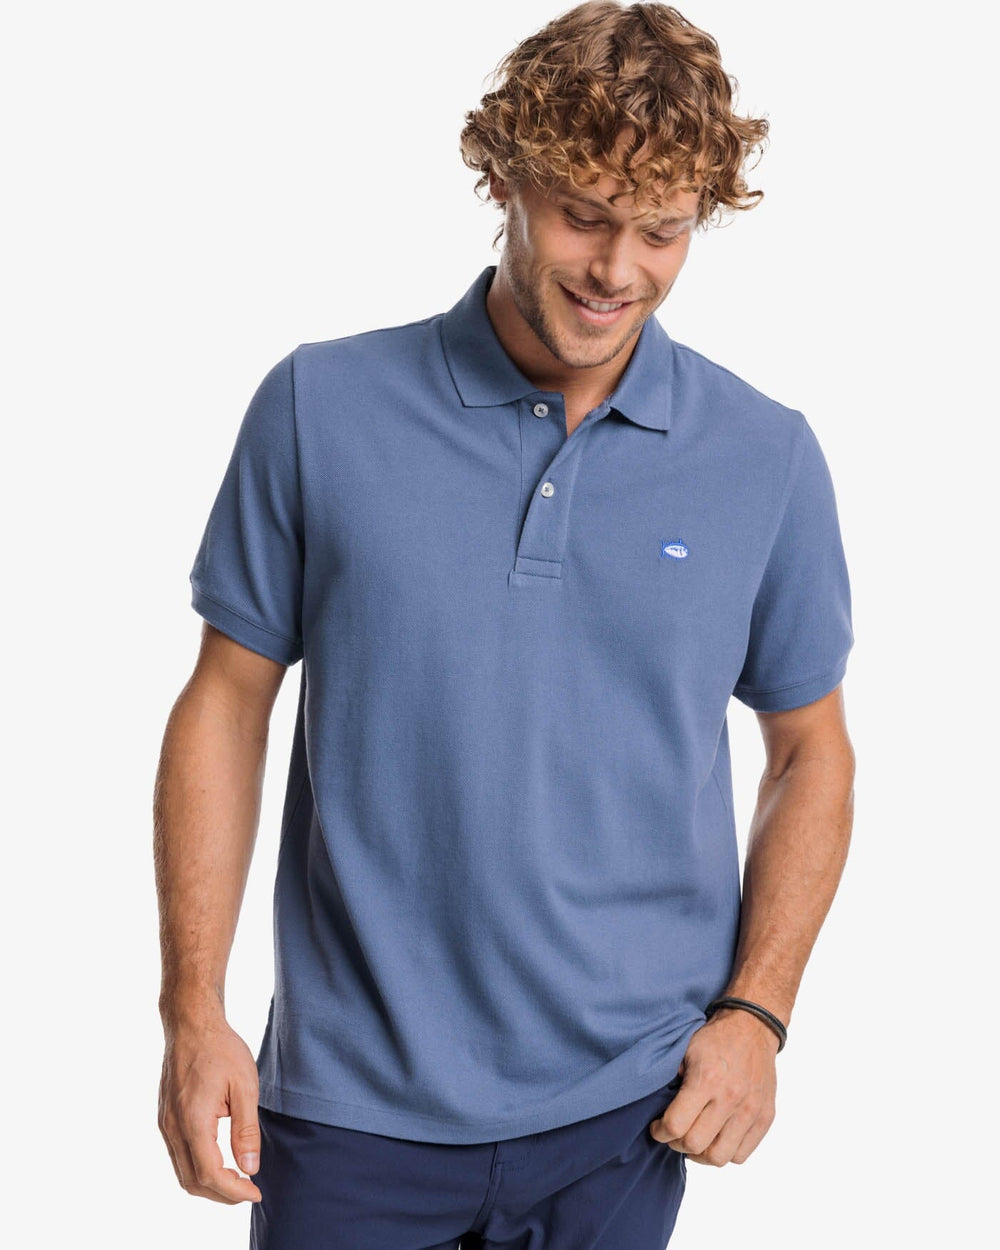 The front view of the Southern Tide New Skipjack Polo Shirt by Southern Tide - Blue Haze